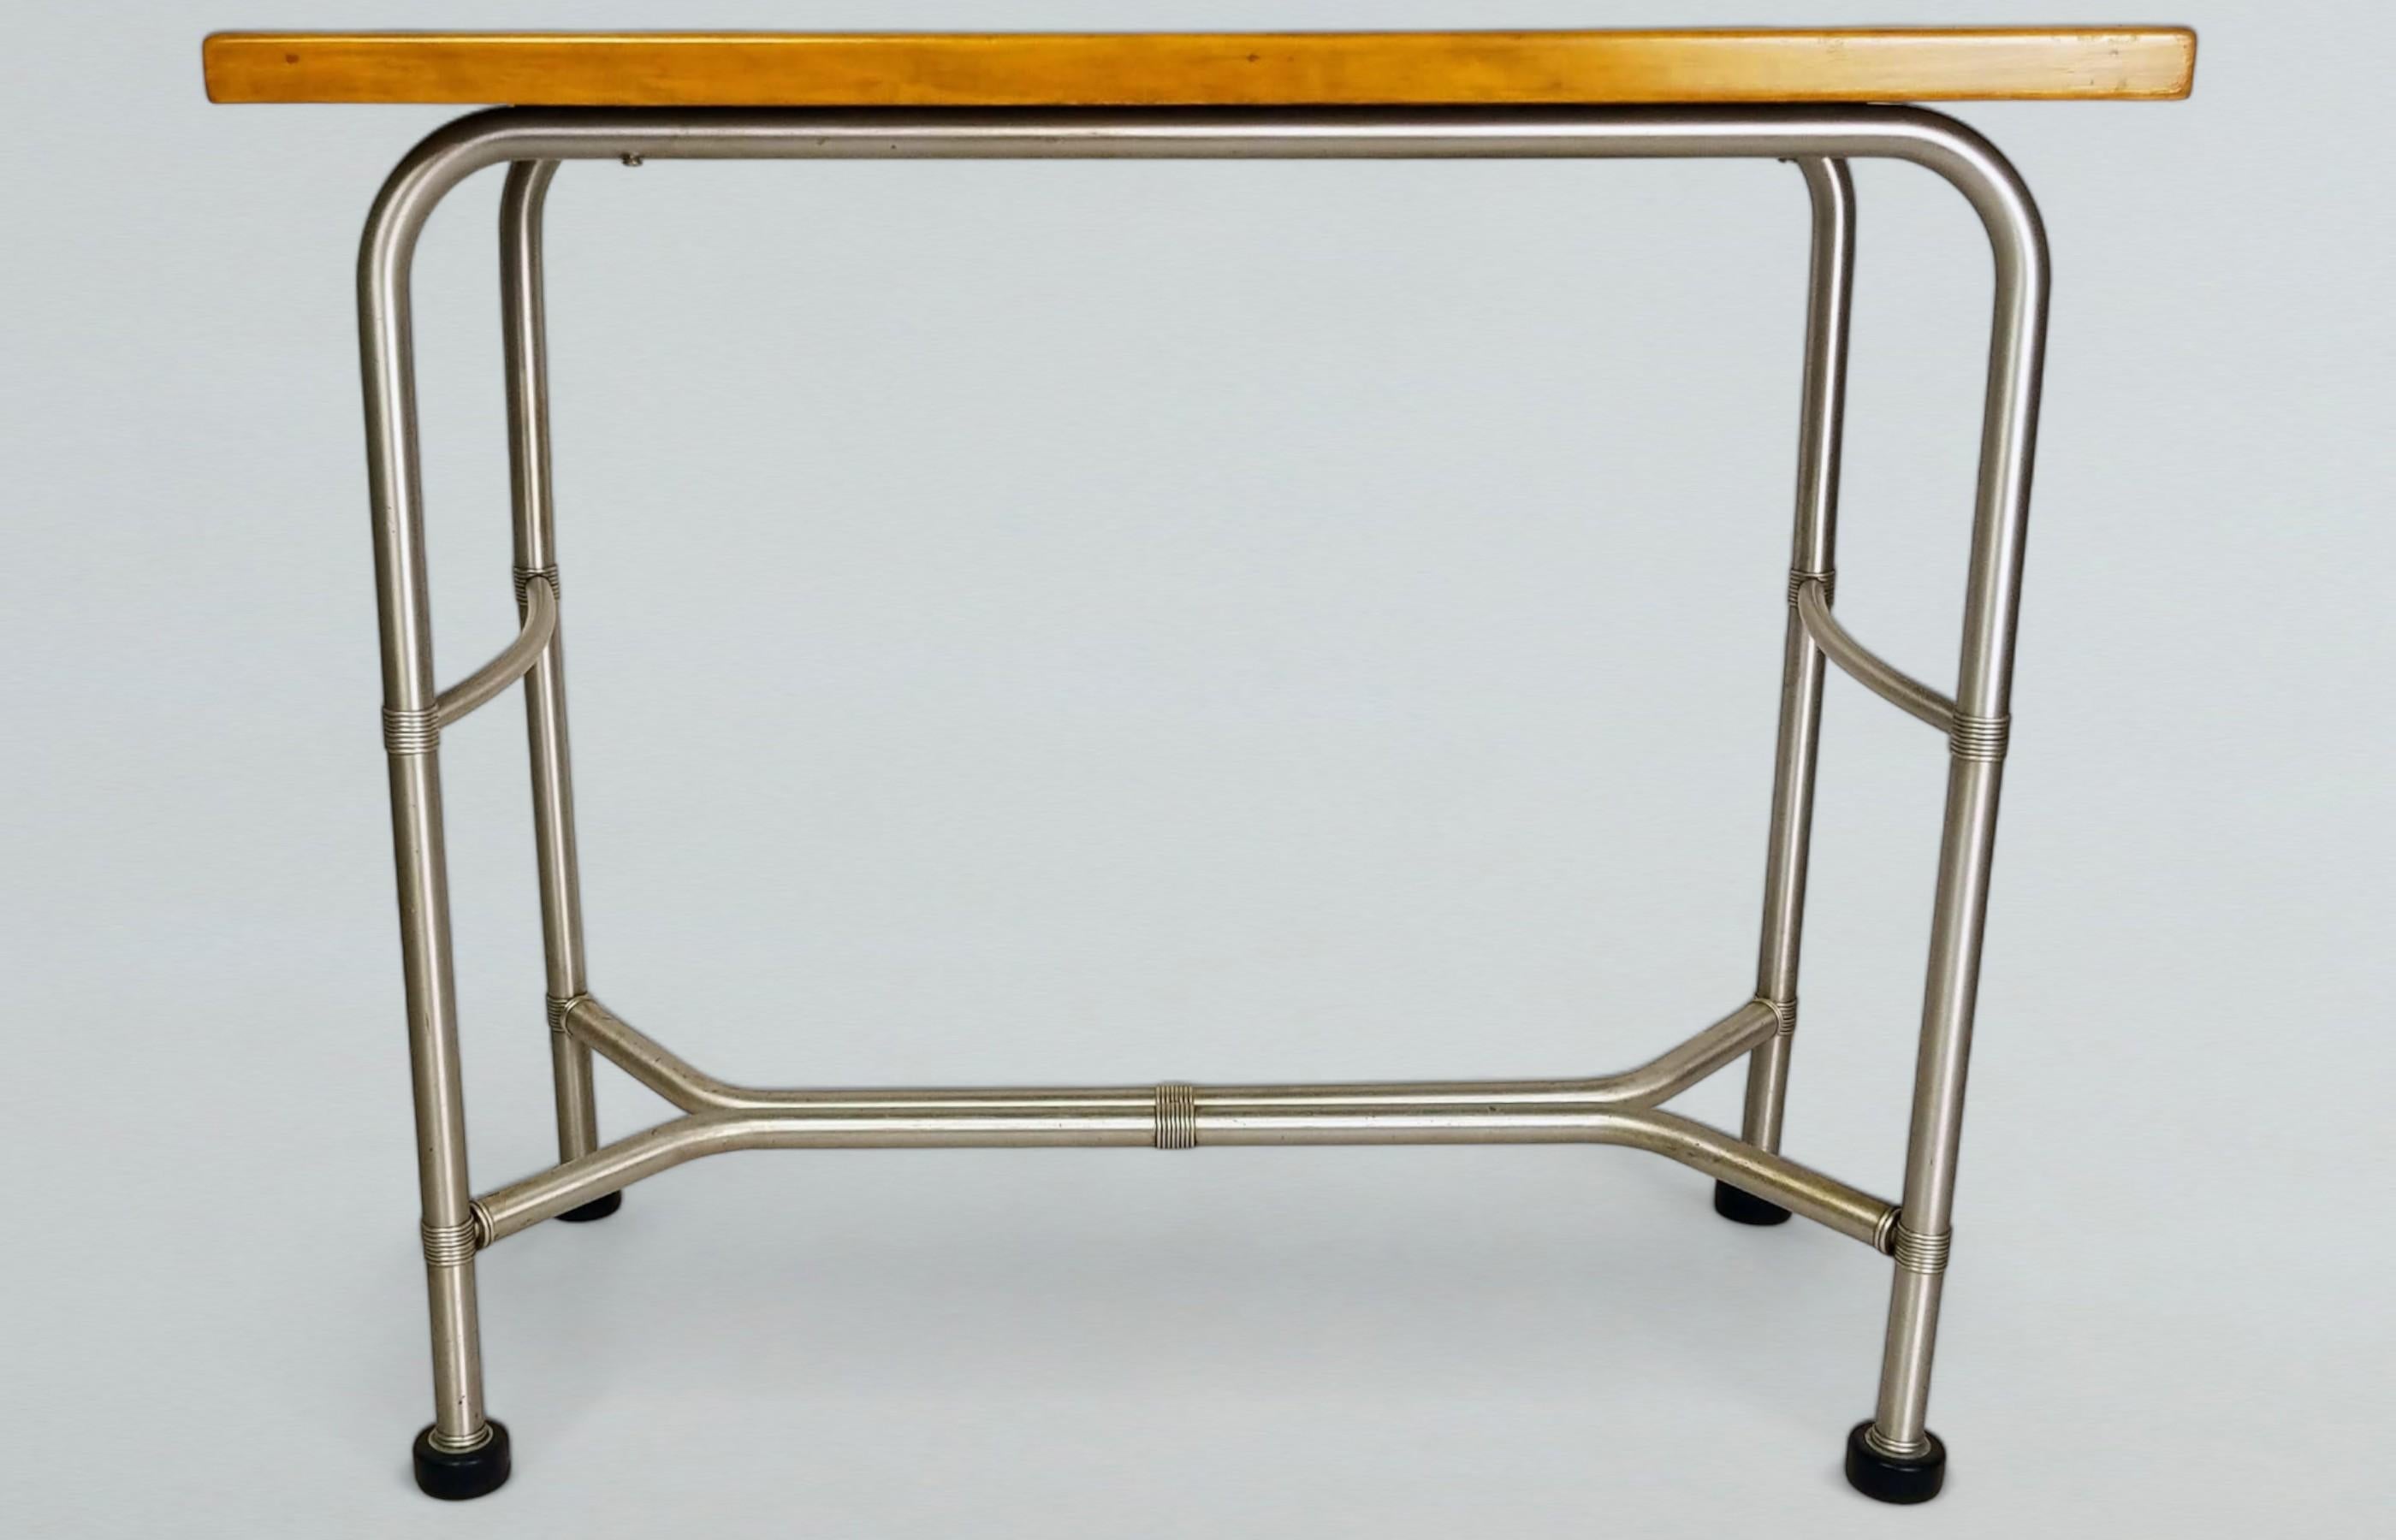 Unusual Warren McArthur console or perhaps a work table from a department store or beauty salon cosmetic cubicle.
The sky blue Cafolite top was produced for the Warren McArthur Corporation in Muskegon, Michigan and was similar to Formica.
The